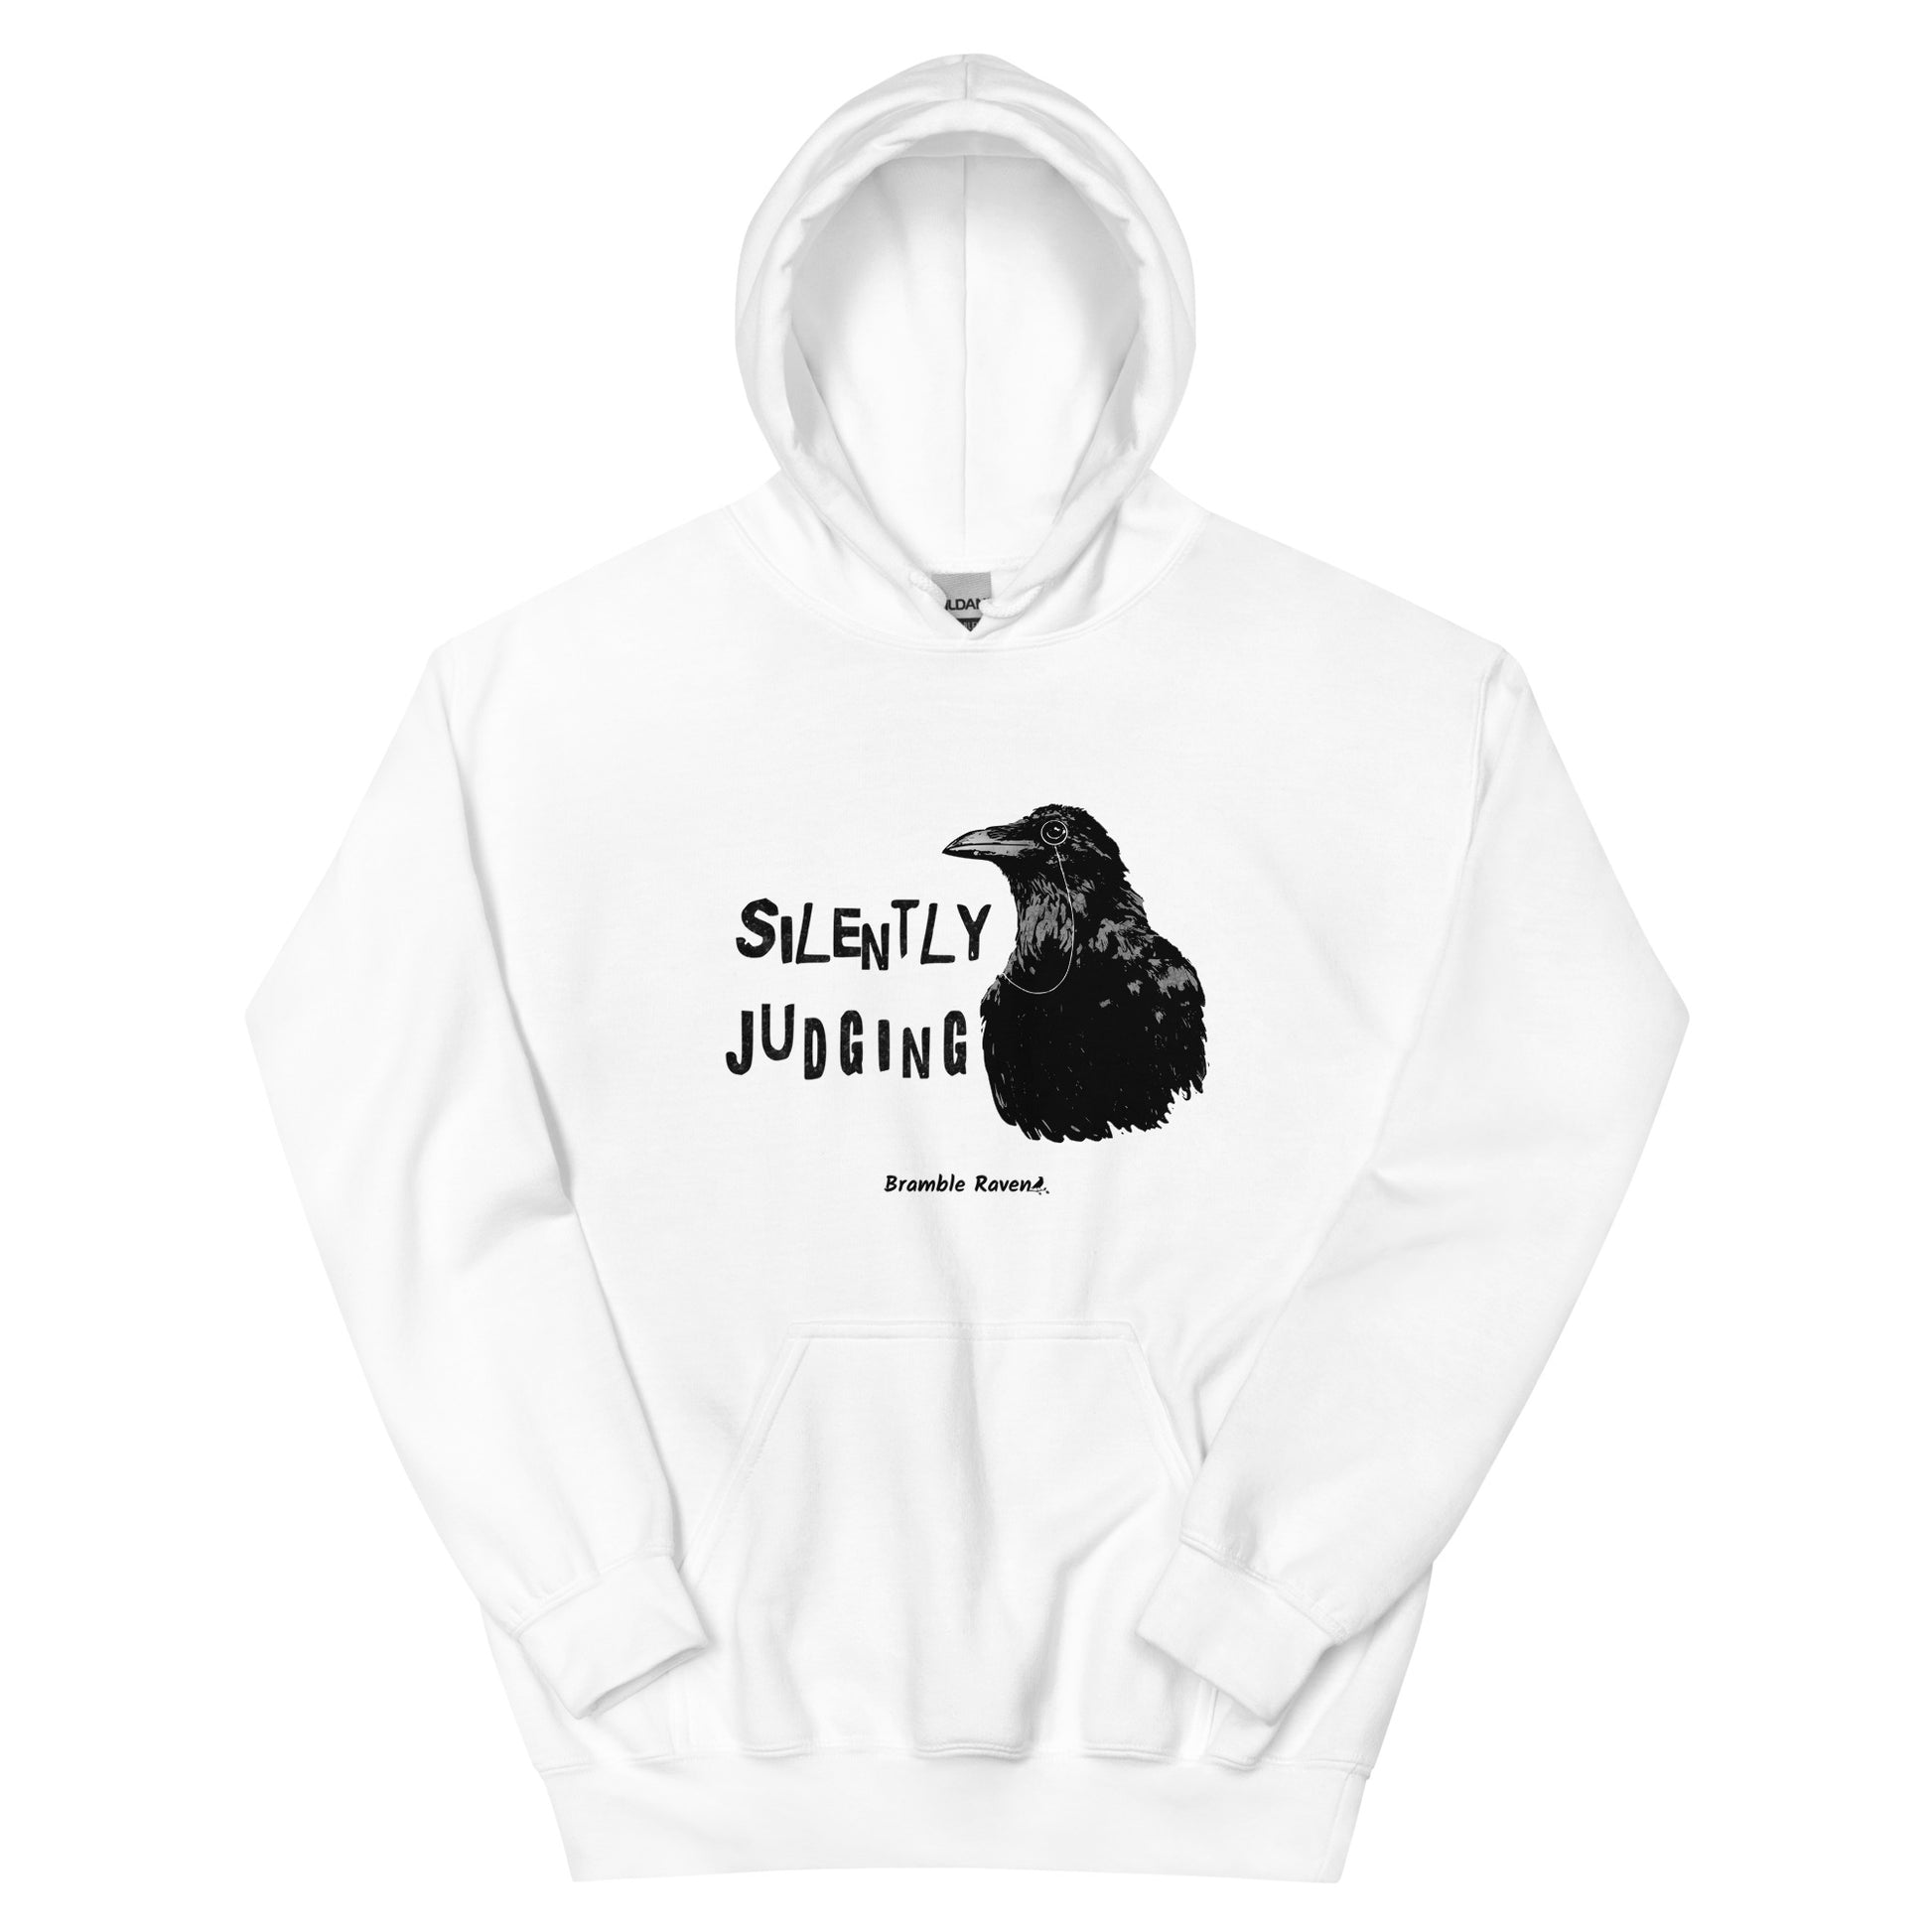 Unisex white colored hoodie with horizontal design of silently judging text by black crow wearing a monocle.  Design on the front of hoodie. Features double-lined hood and front pouch pocket.